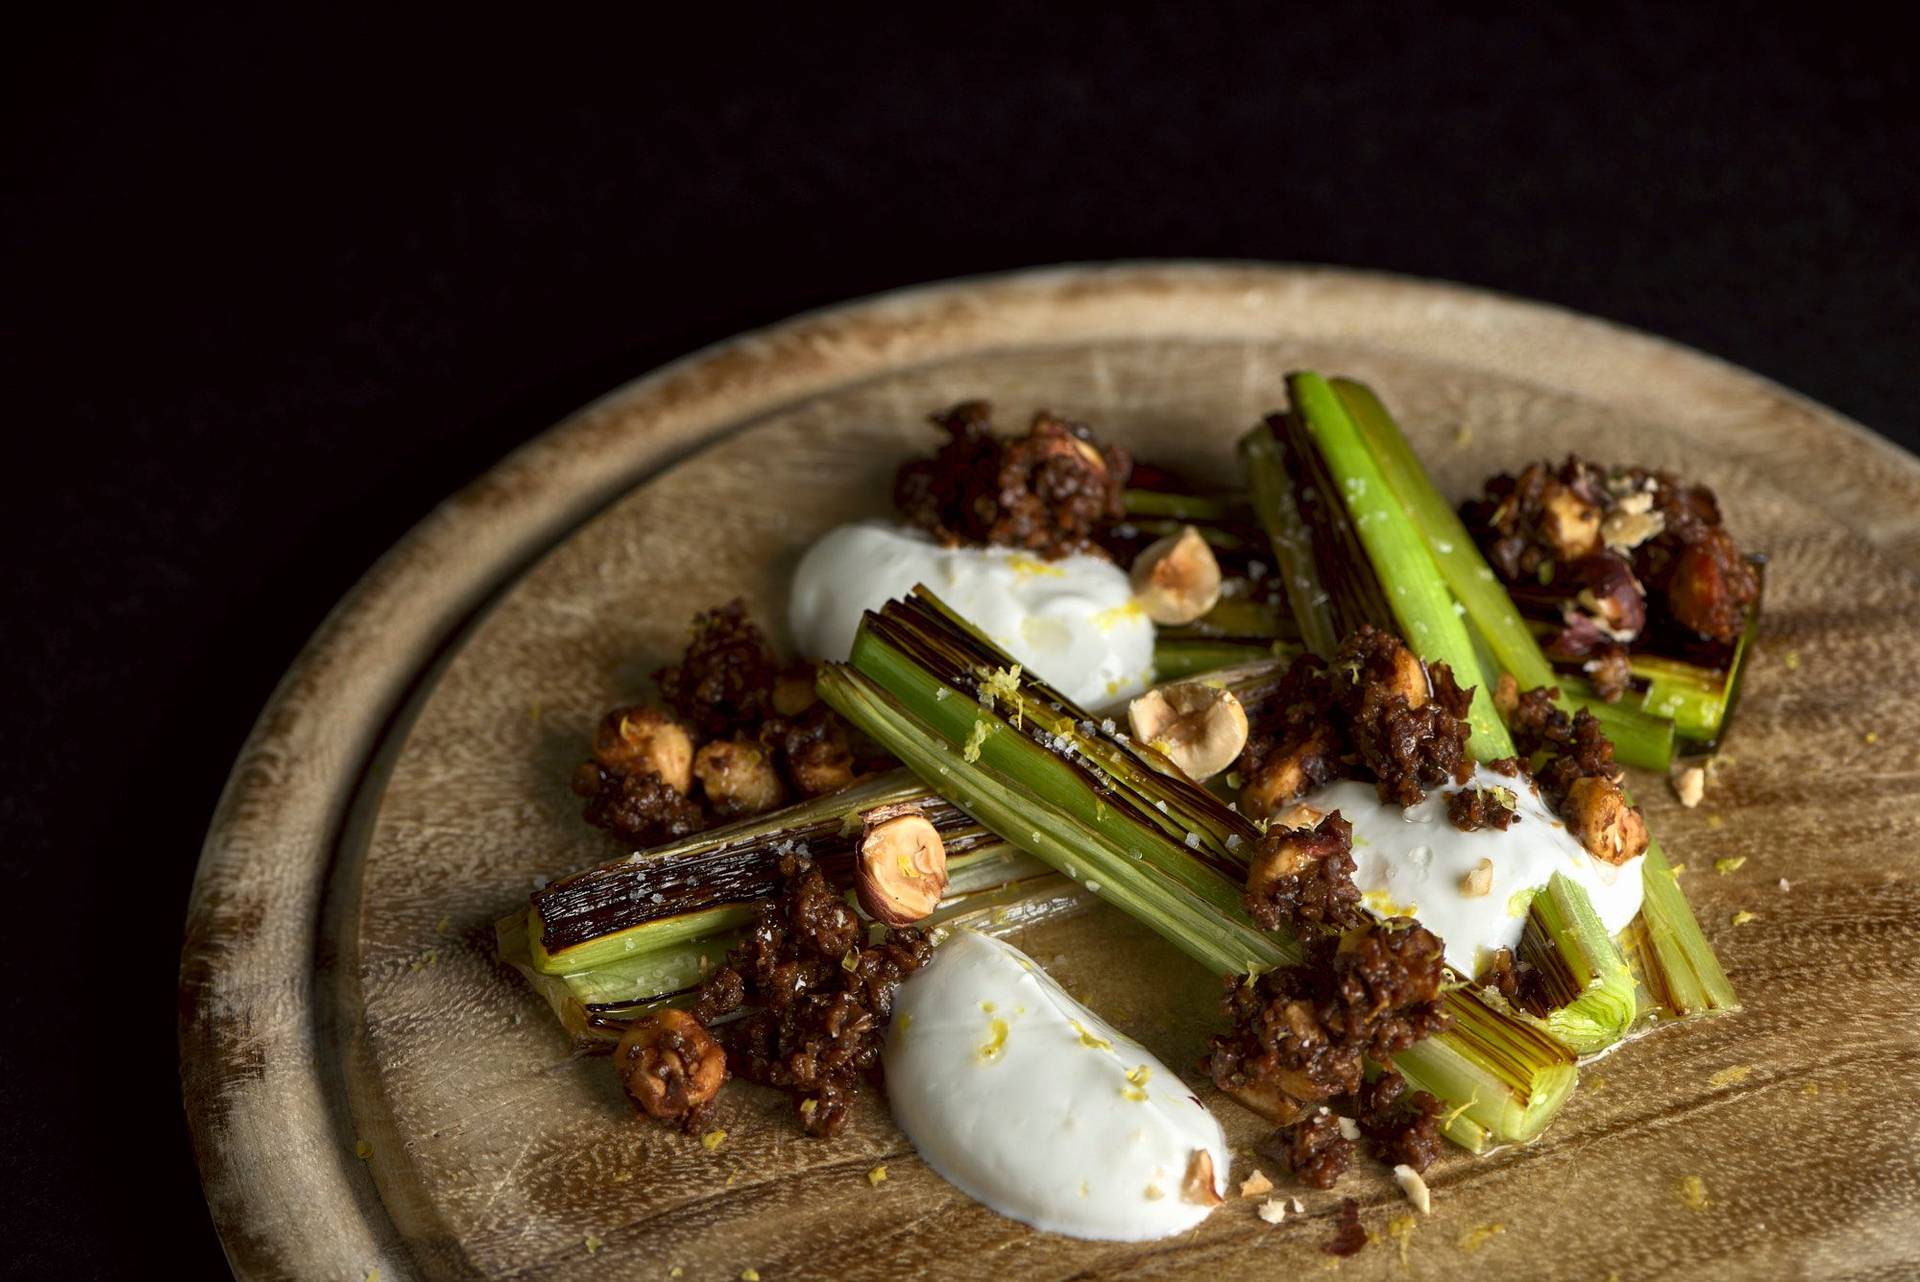 beer braised leek with pumpernickel and skyr on a wooden board with black background